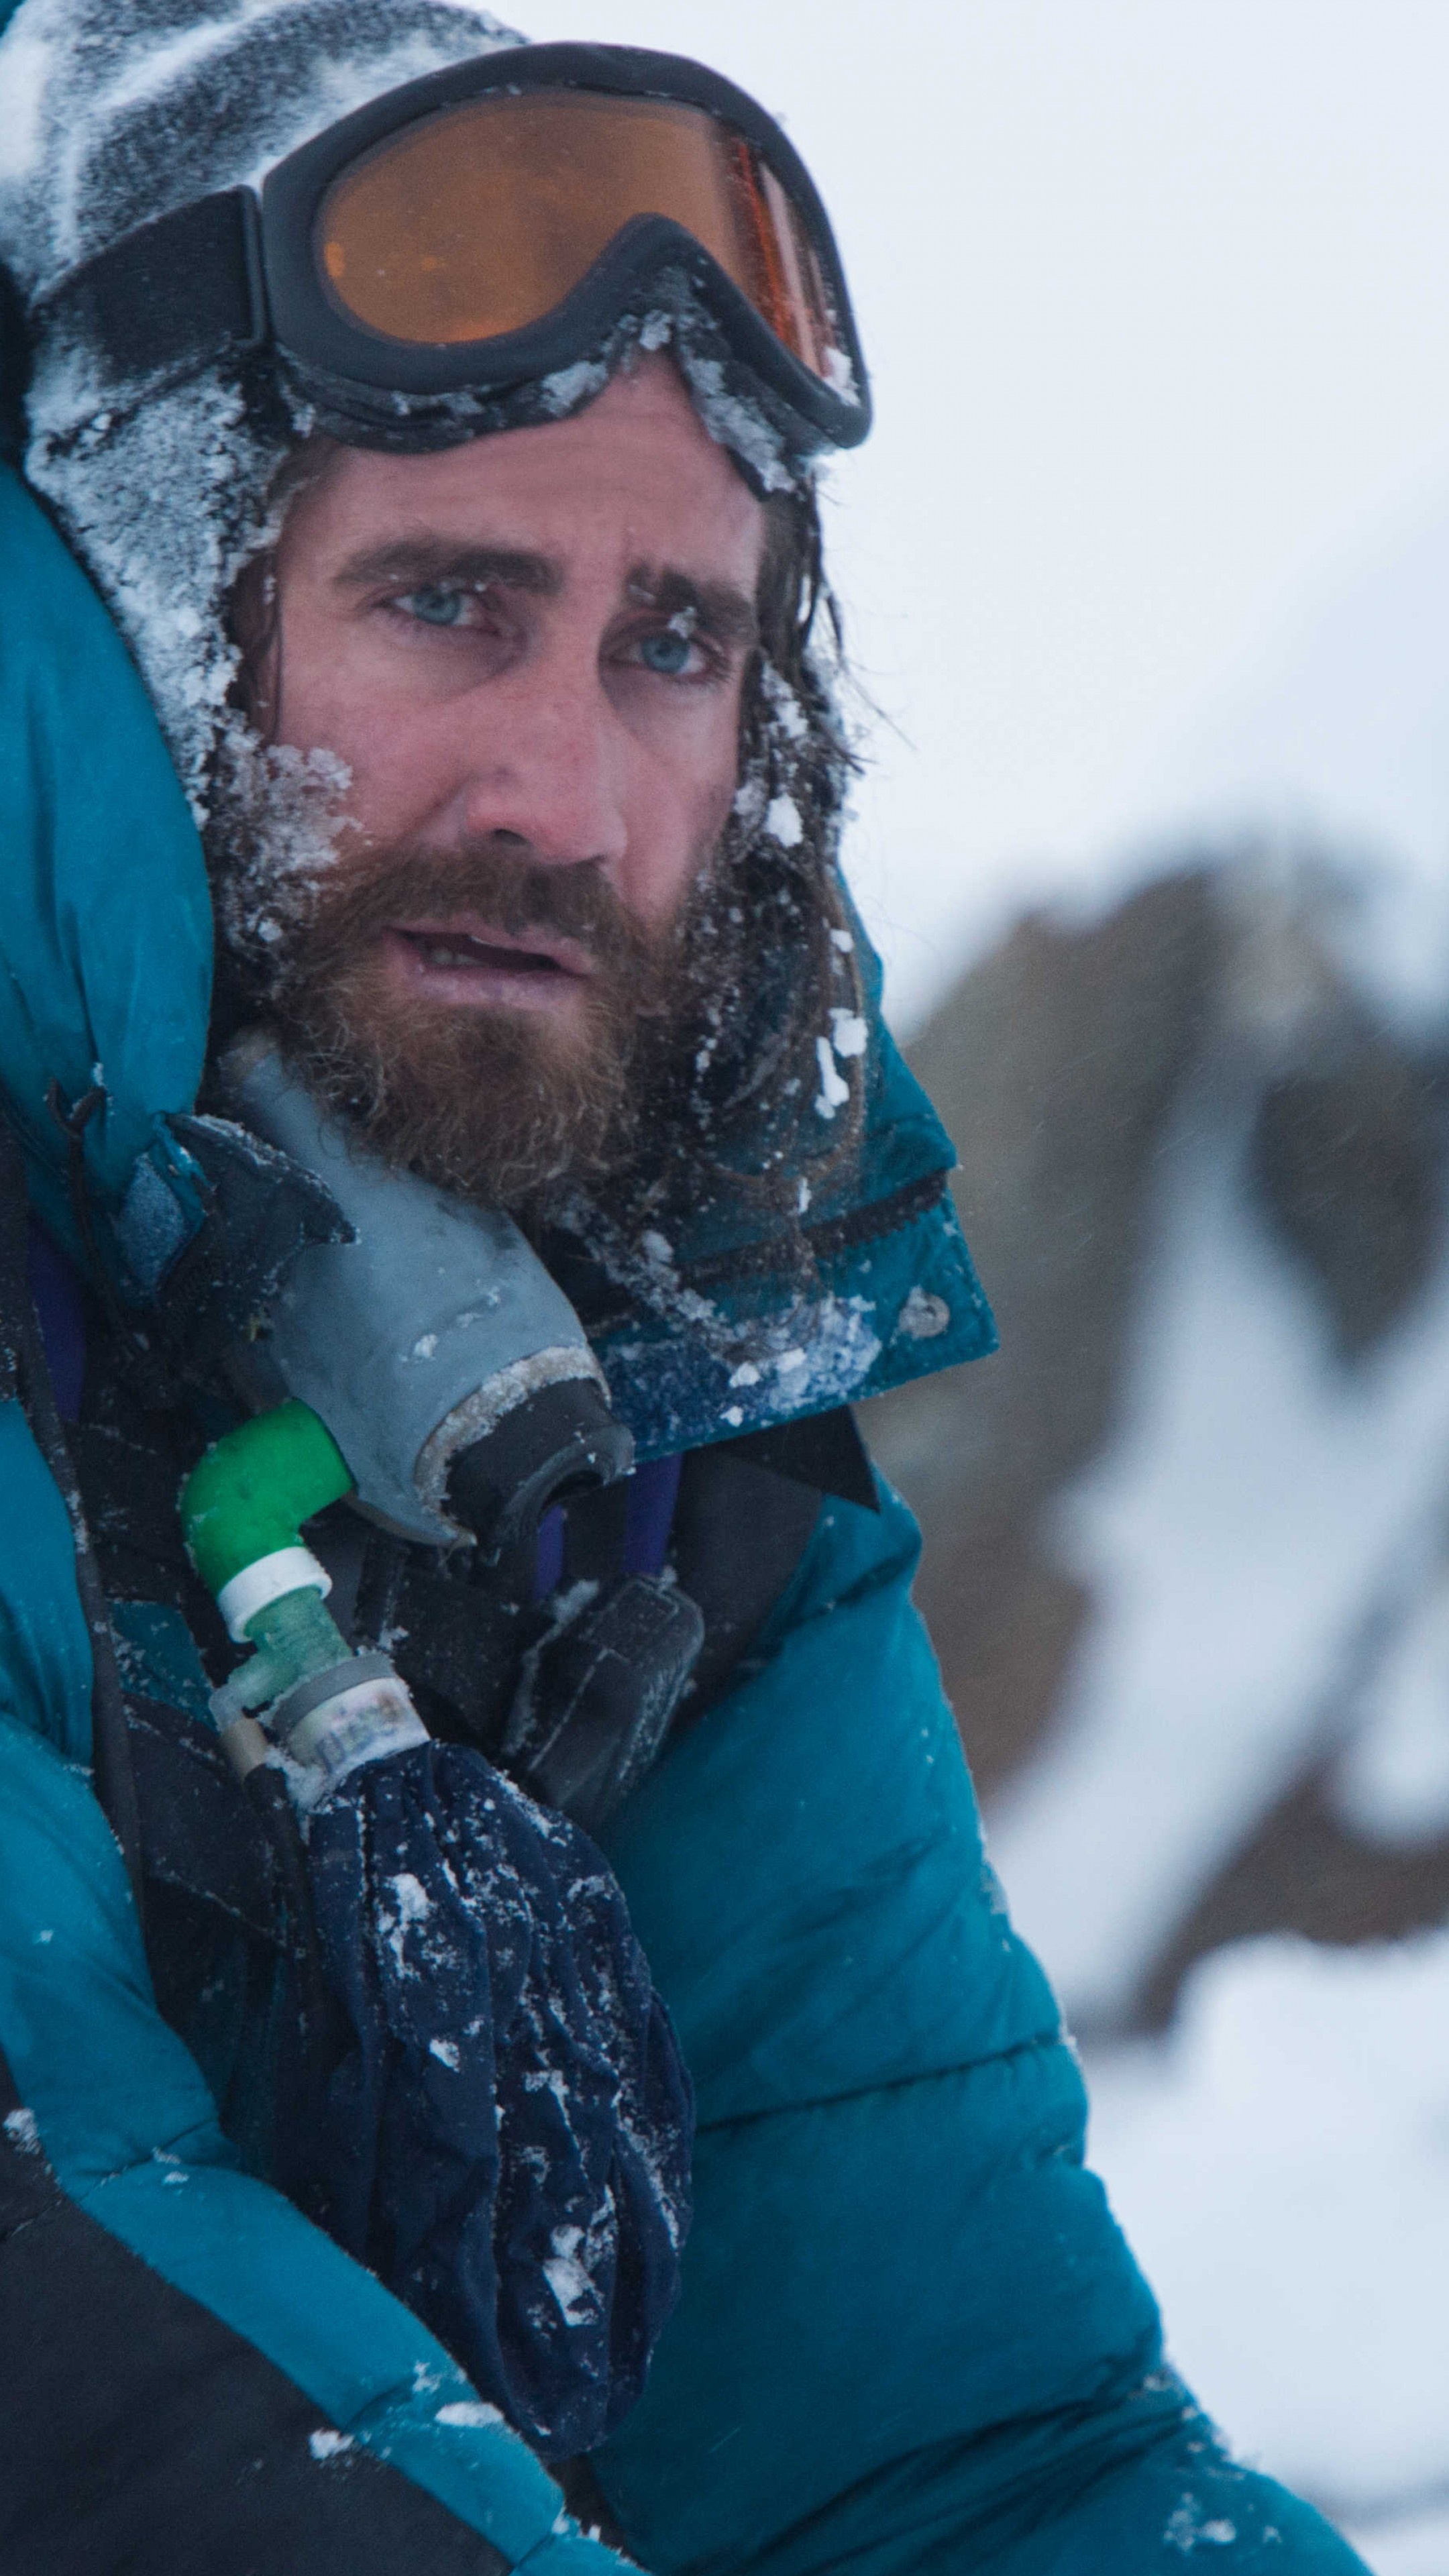 Jake Gyllenhaal: Appeared as Scott Fischer in a 2015 biographical survival film, Everest. 2160x3840 4K Background.